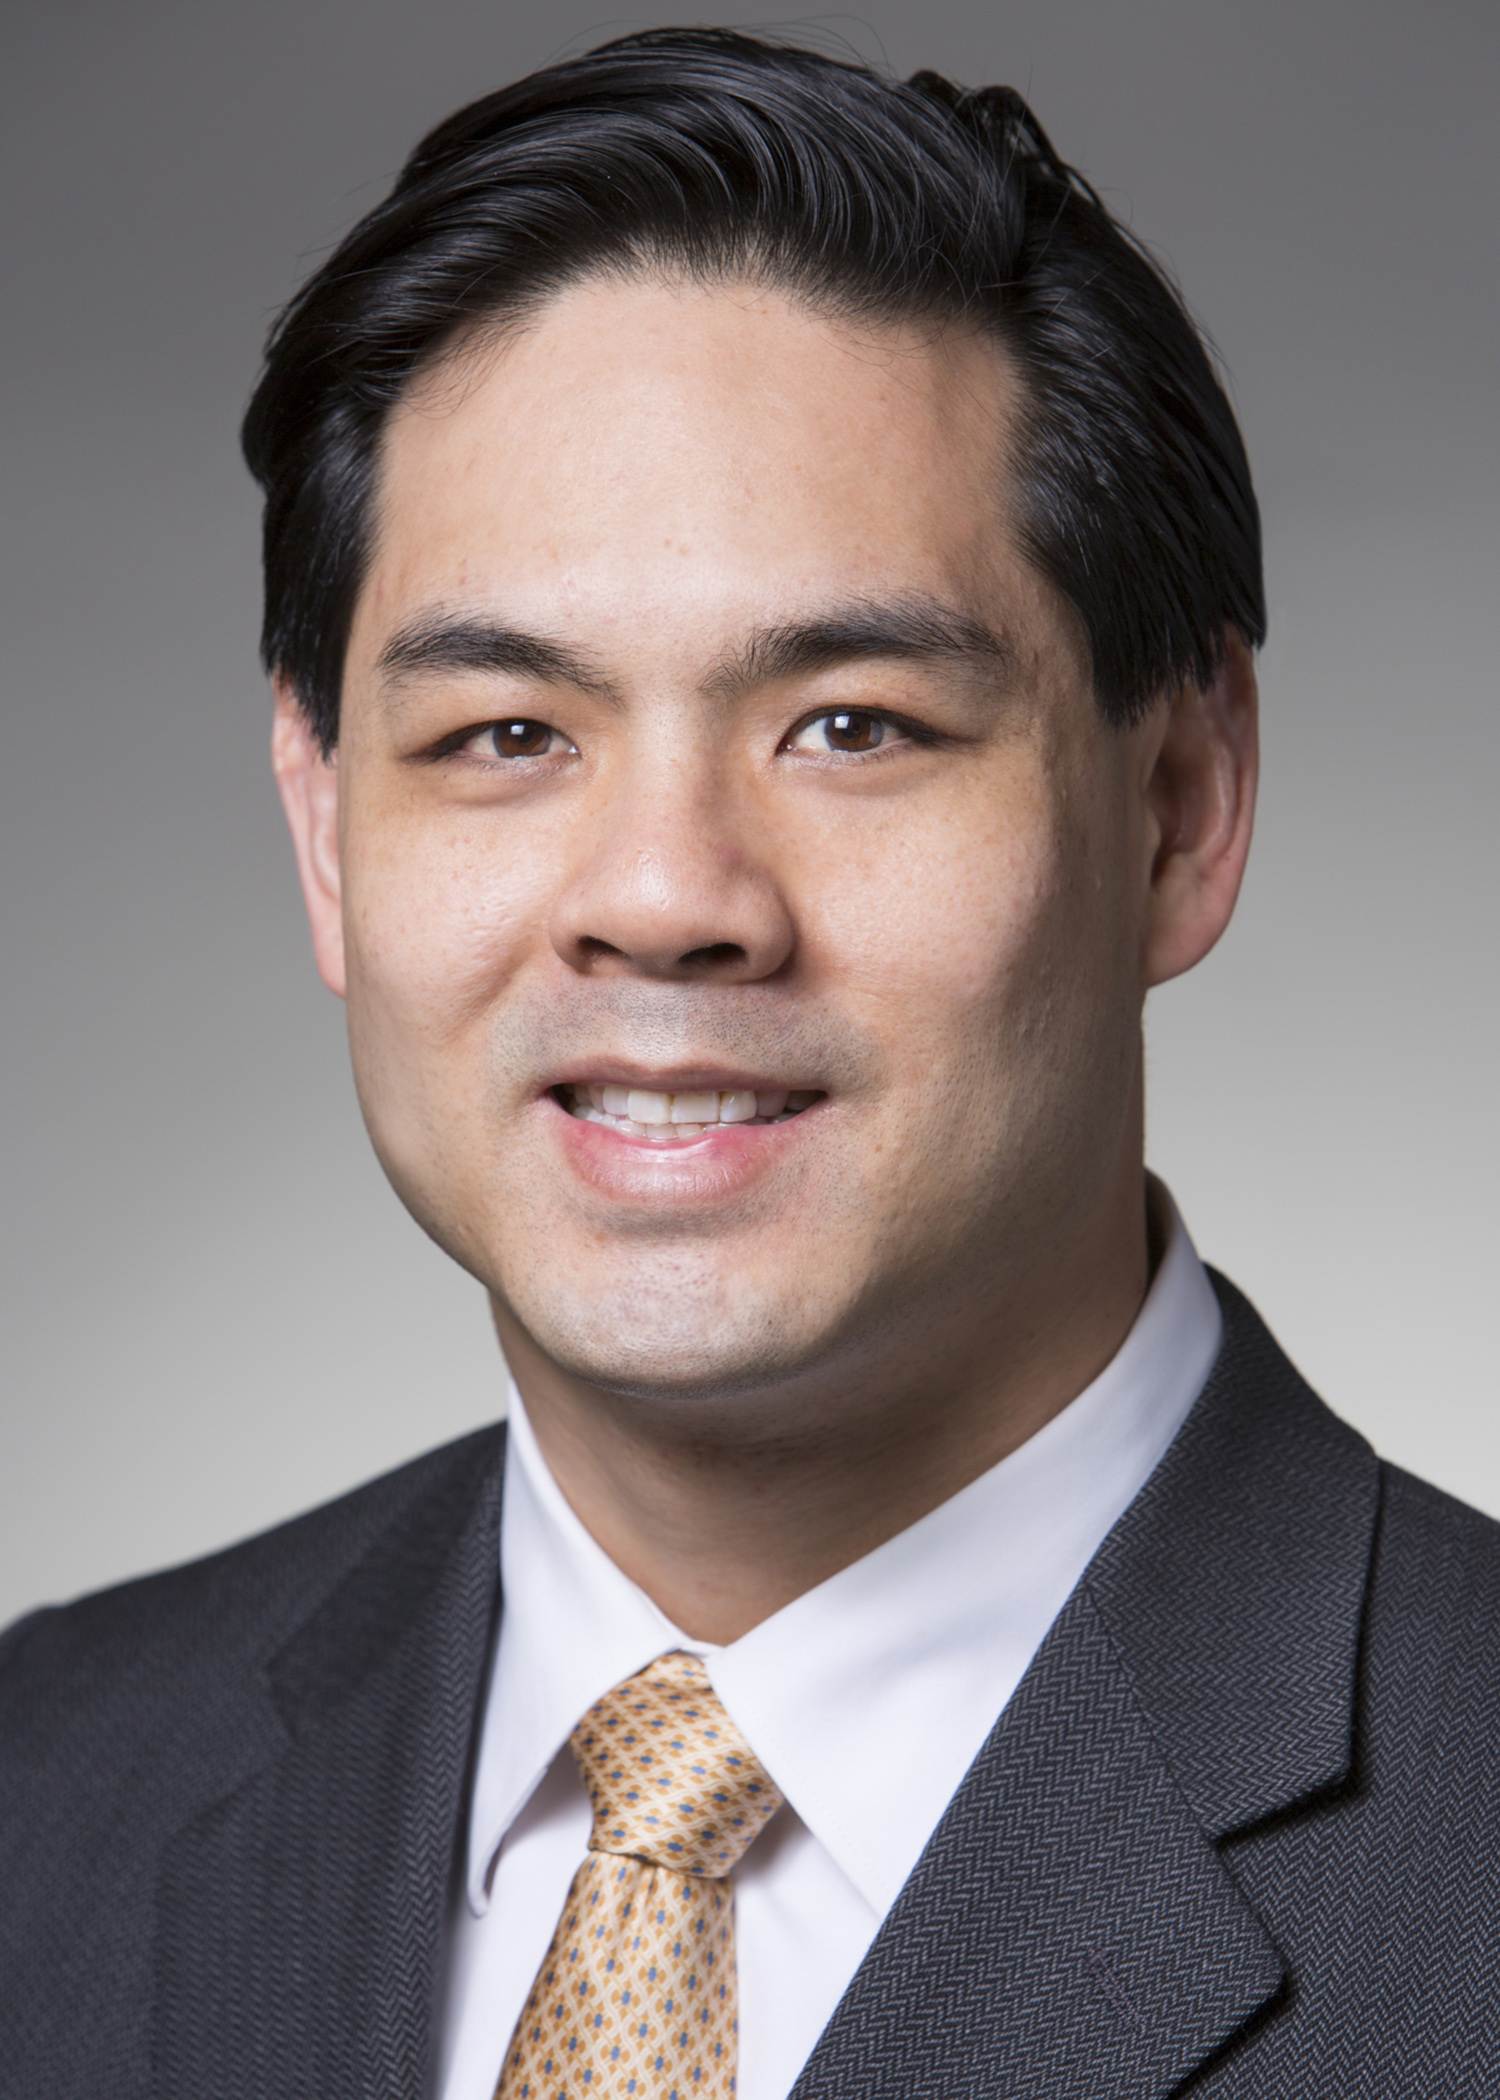 Suan Tan was hired as a fiduciary advisor by Wilmington Trust for the Delaware market.